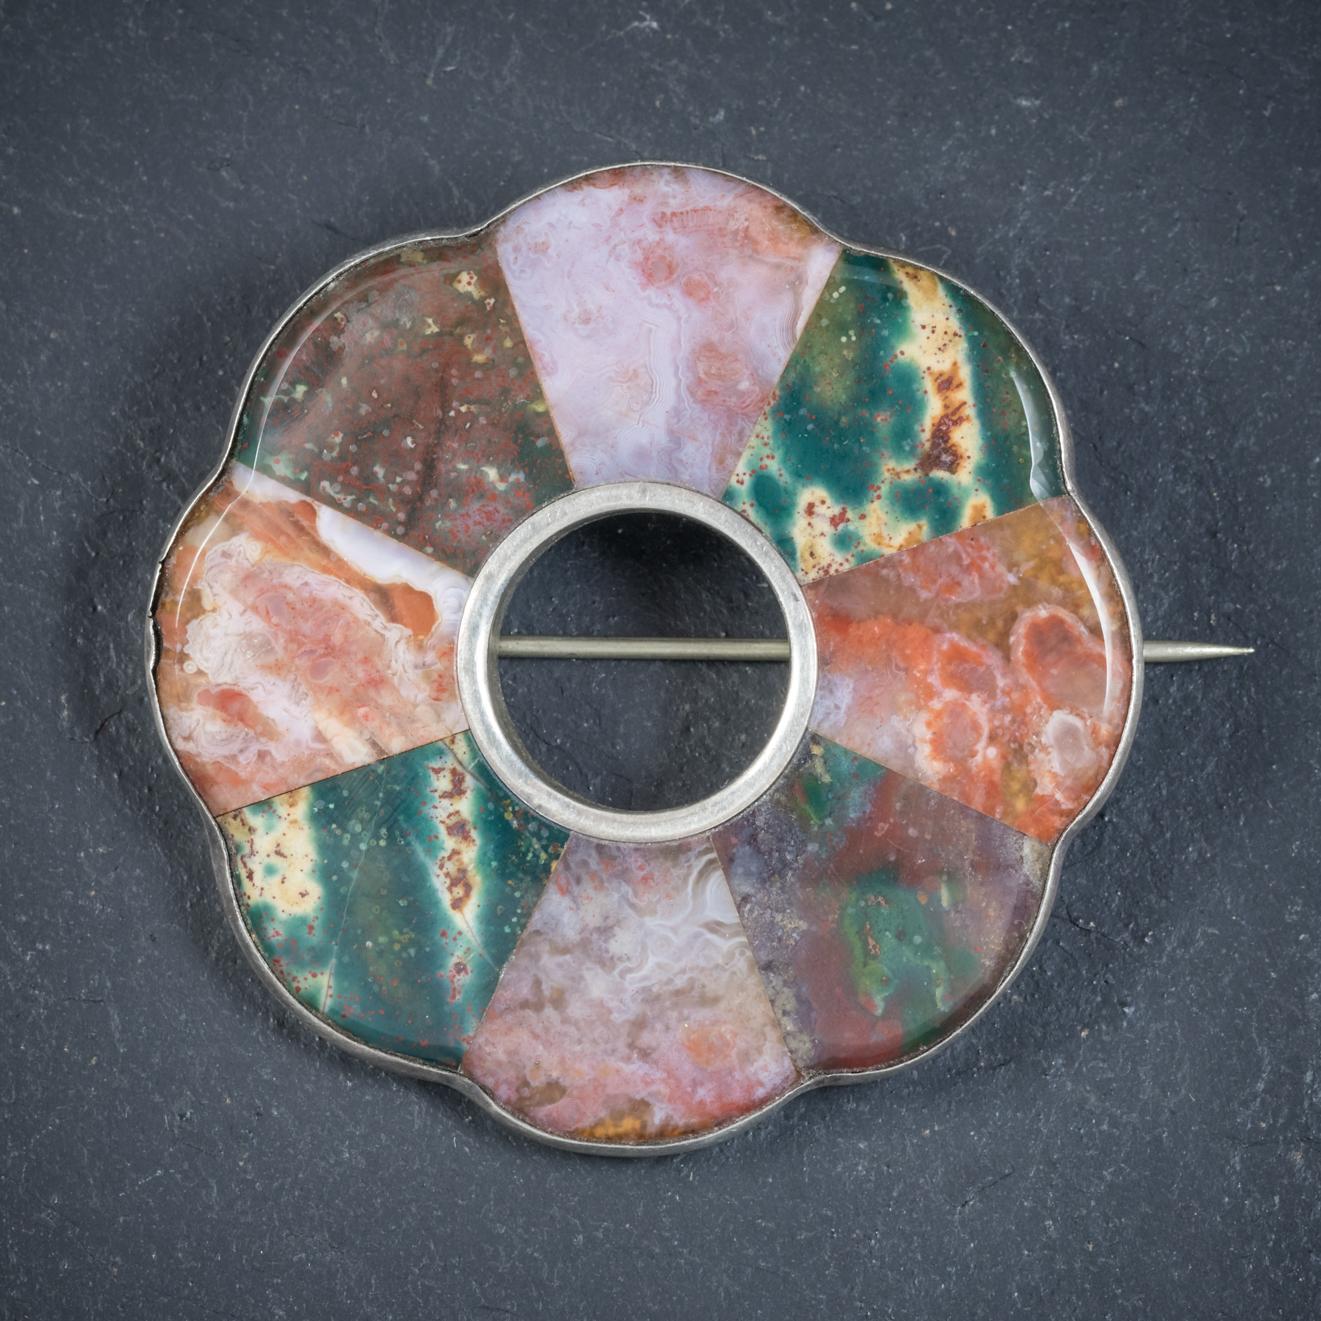 A wonderful antique Scottish Agate brooch from the Victorian era, Circa 1900

The lovely piece features eight polished Agates which display beautiful earthy colouring and natural patterns 

The stones are inlaid in a lovely Silver setting which is